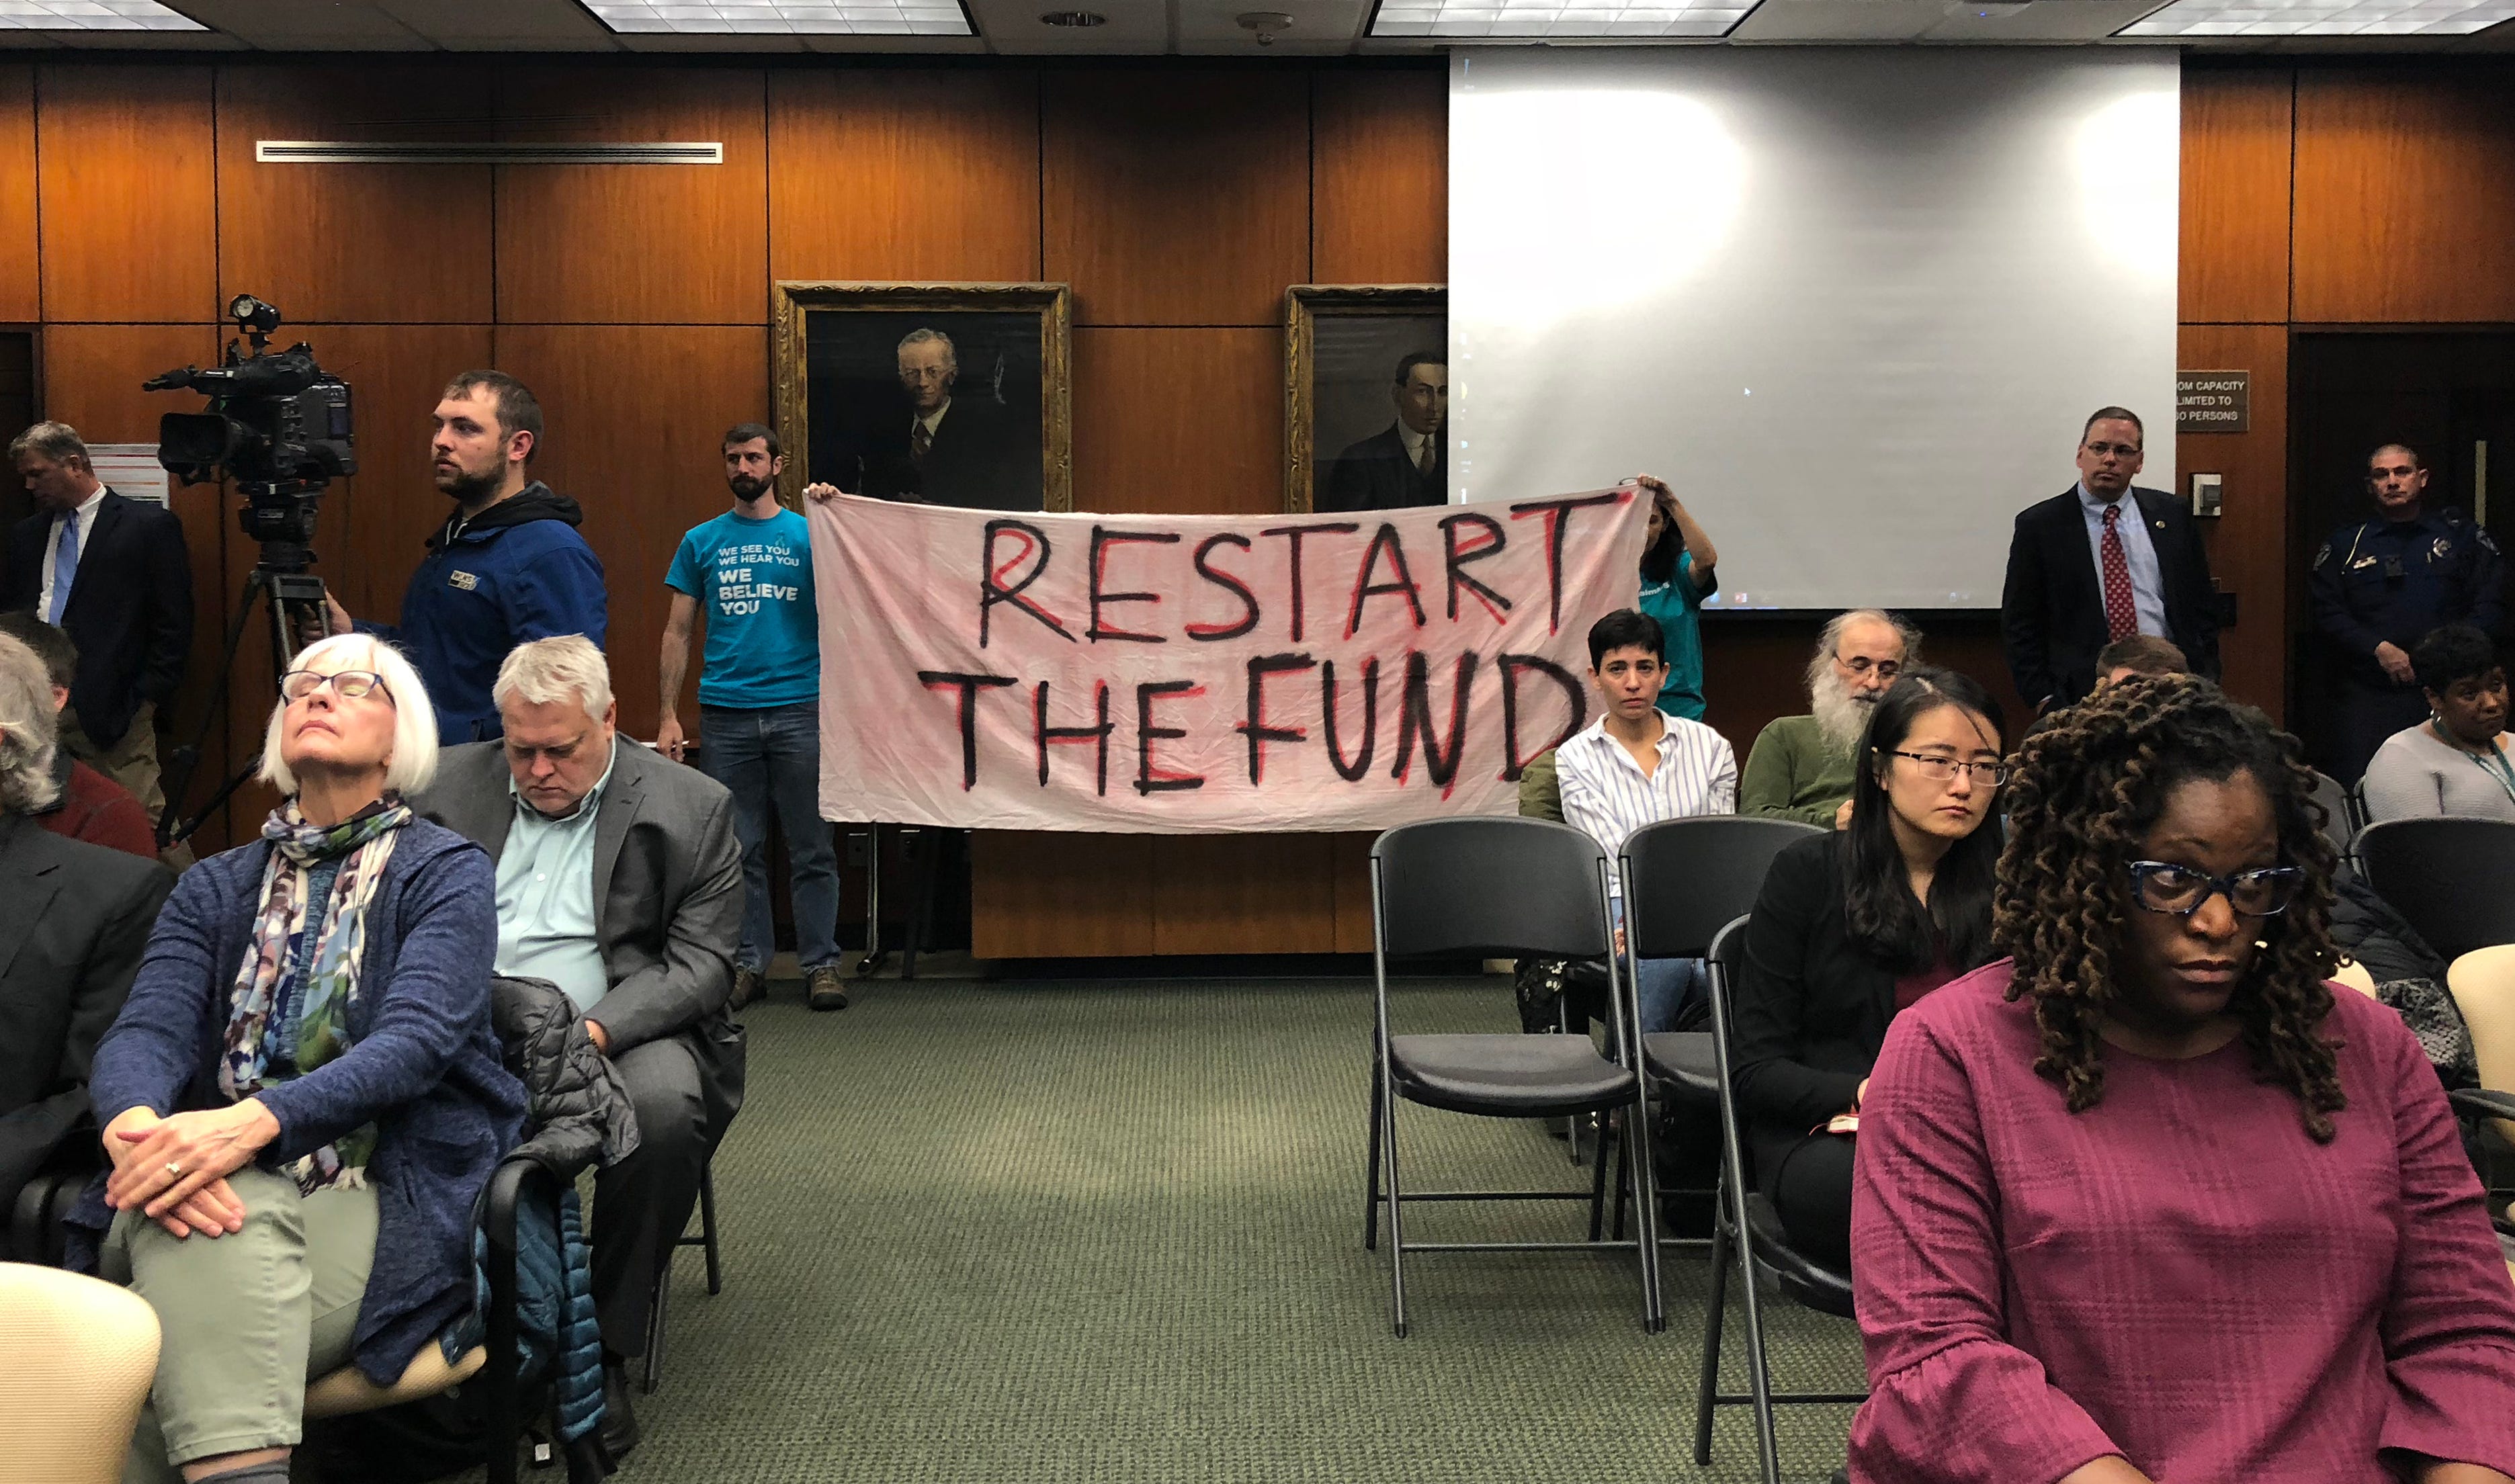 Allies of Larry Nassar victims demand that Michigan State University restore the $10 million Healing Assistance Fund during the Oct. 26 meeting of the Board of Trustees.